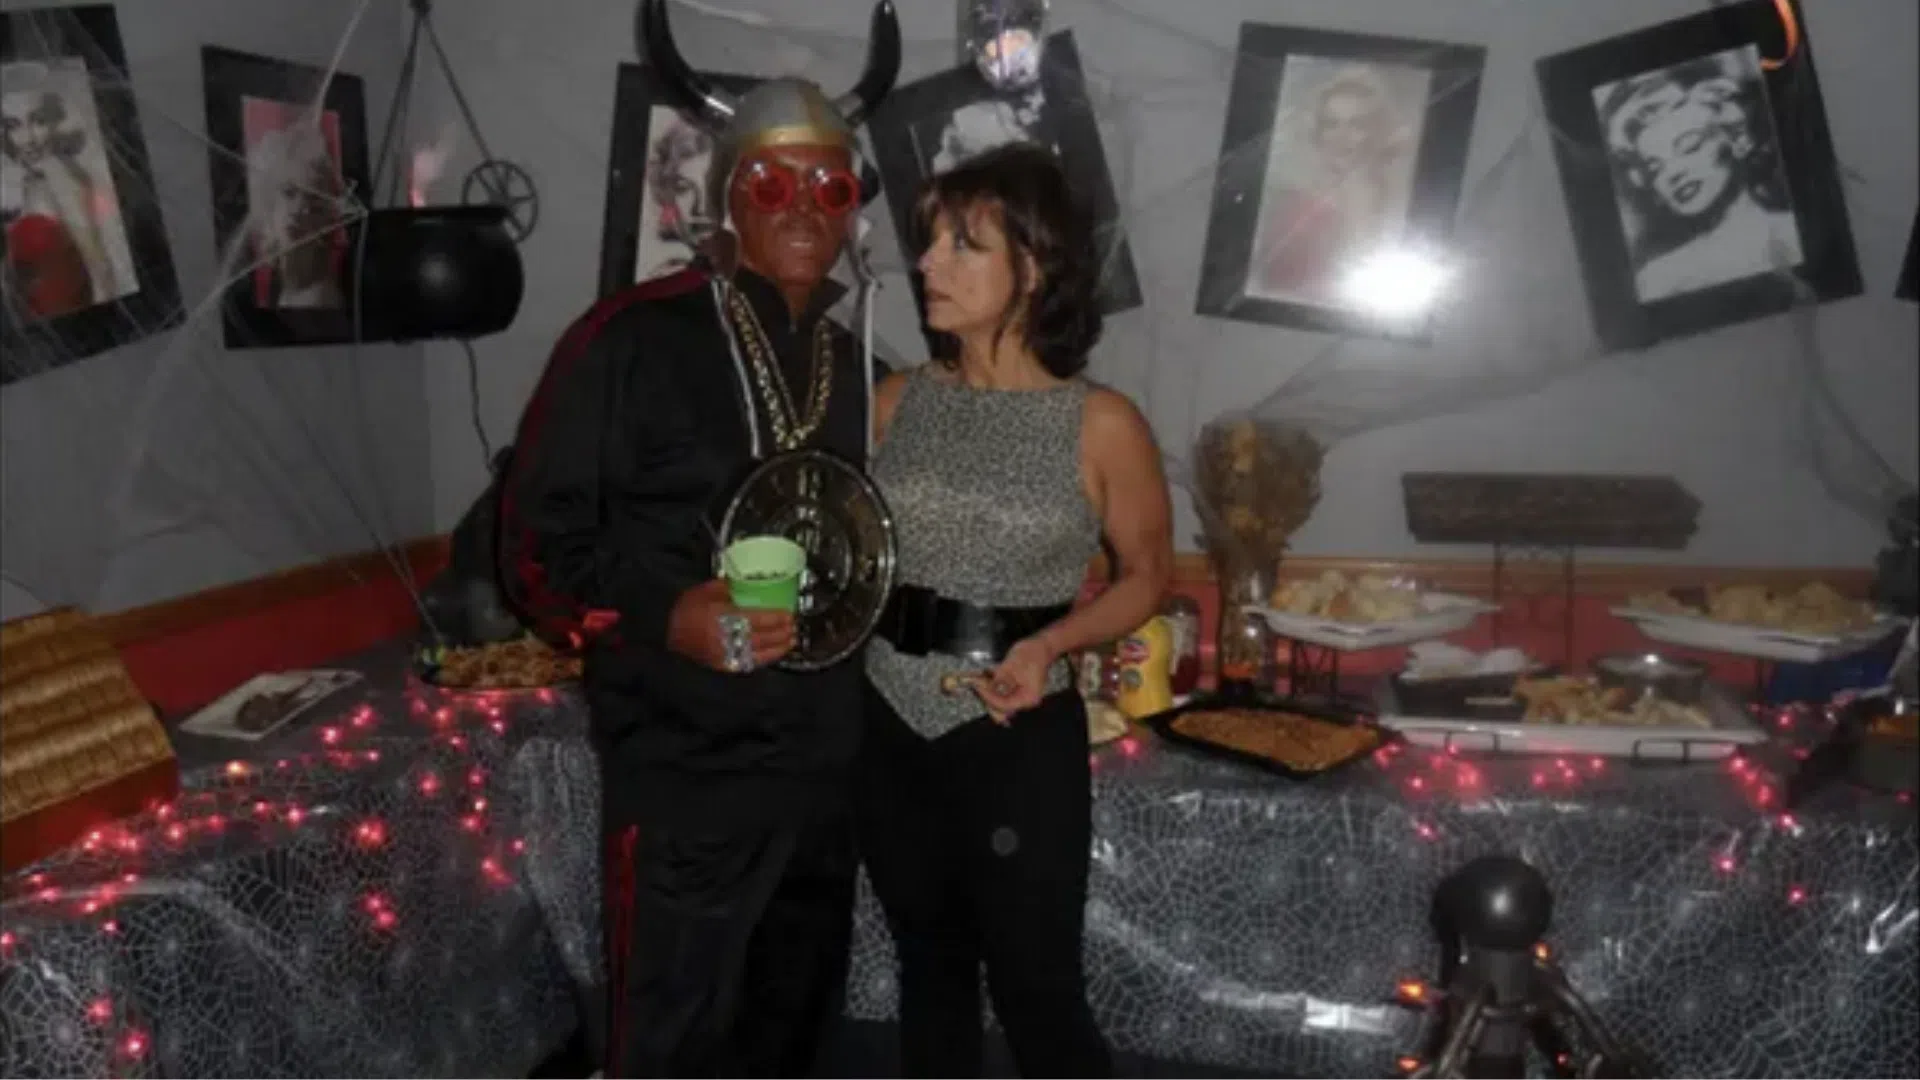 Republican Councilman Vincent Kelly Apologizes For Dressing As Flavor Flav And Wearing Blackface